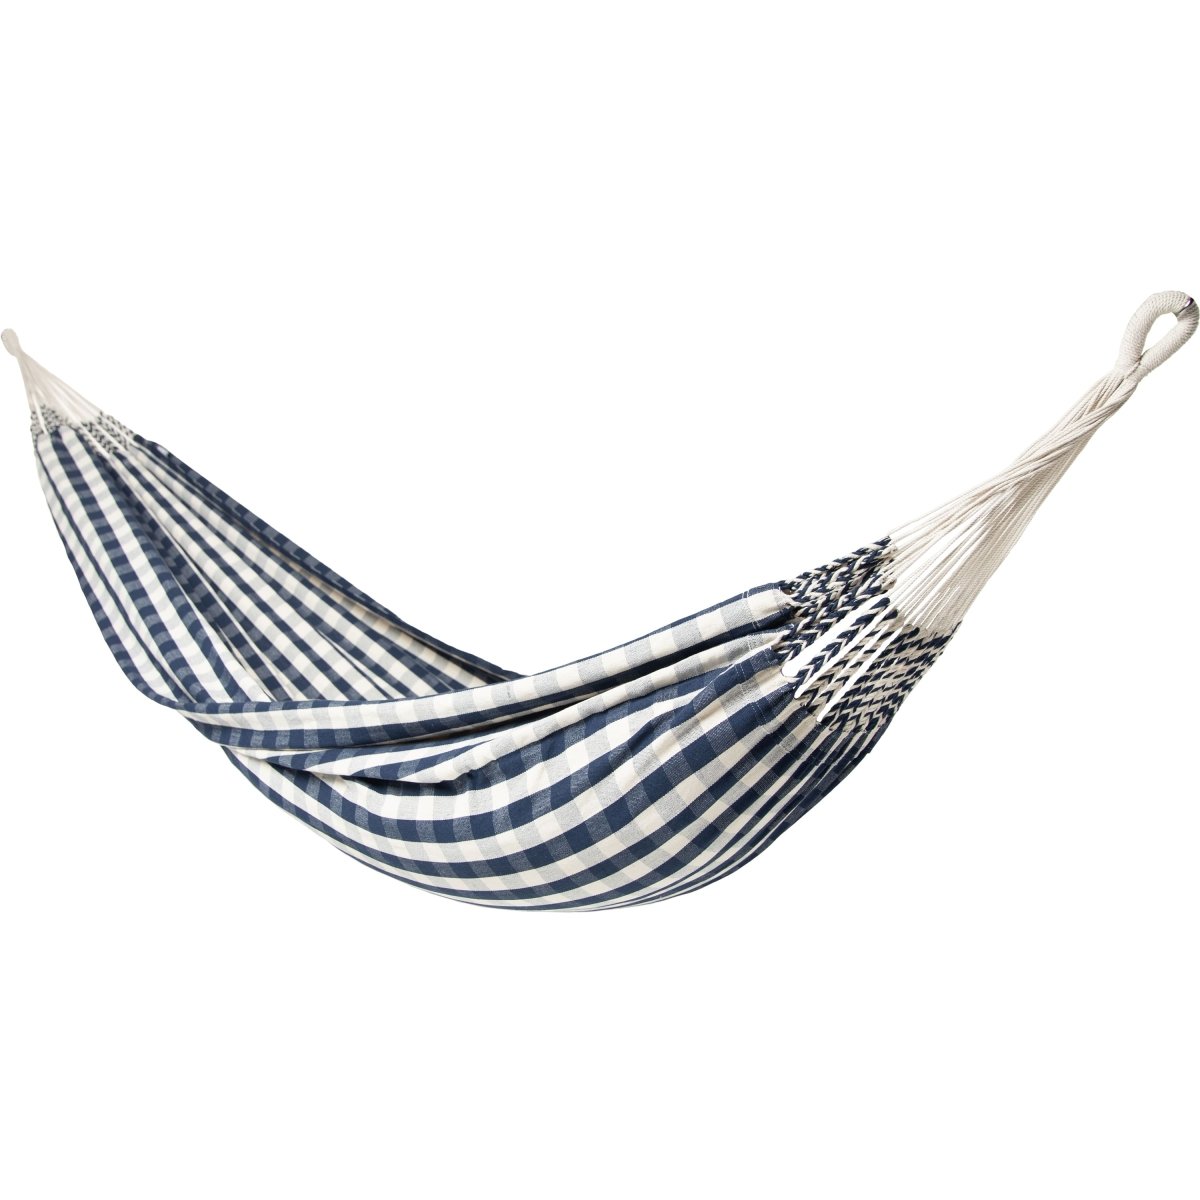 10ft White Universal Steel Hammock Stand & Authentic Double Vichy Hammock in Navy - Outdoorium